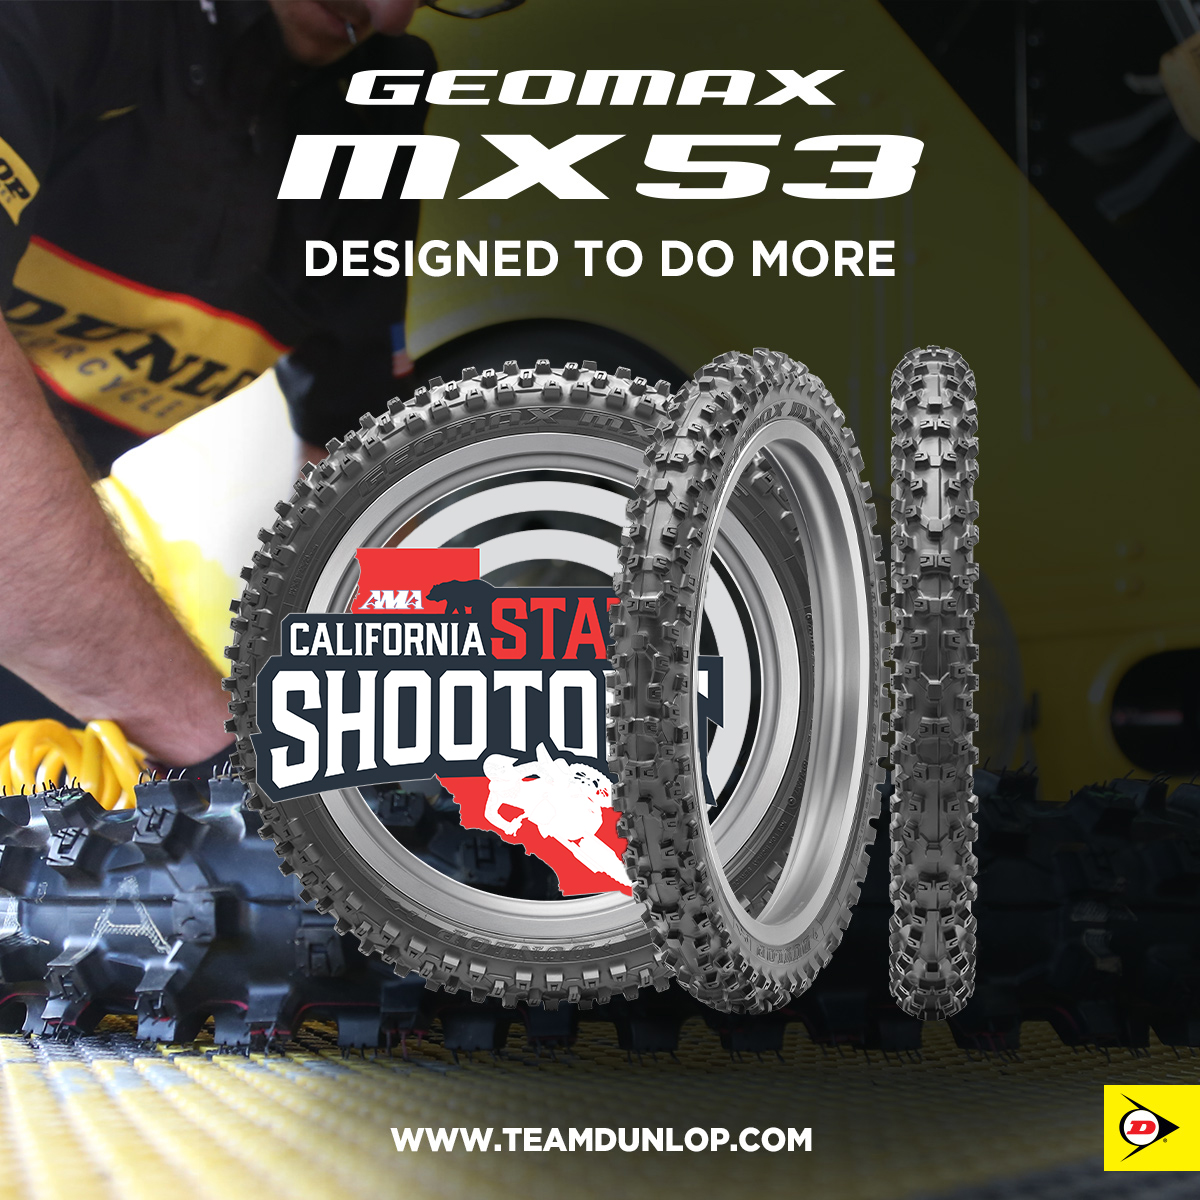 dunlop-offers-rebate-to-first-250-riders-of-shootout-united-motocross